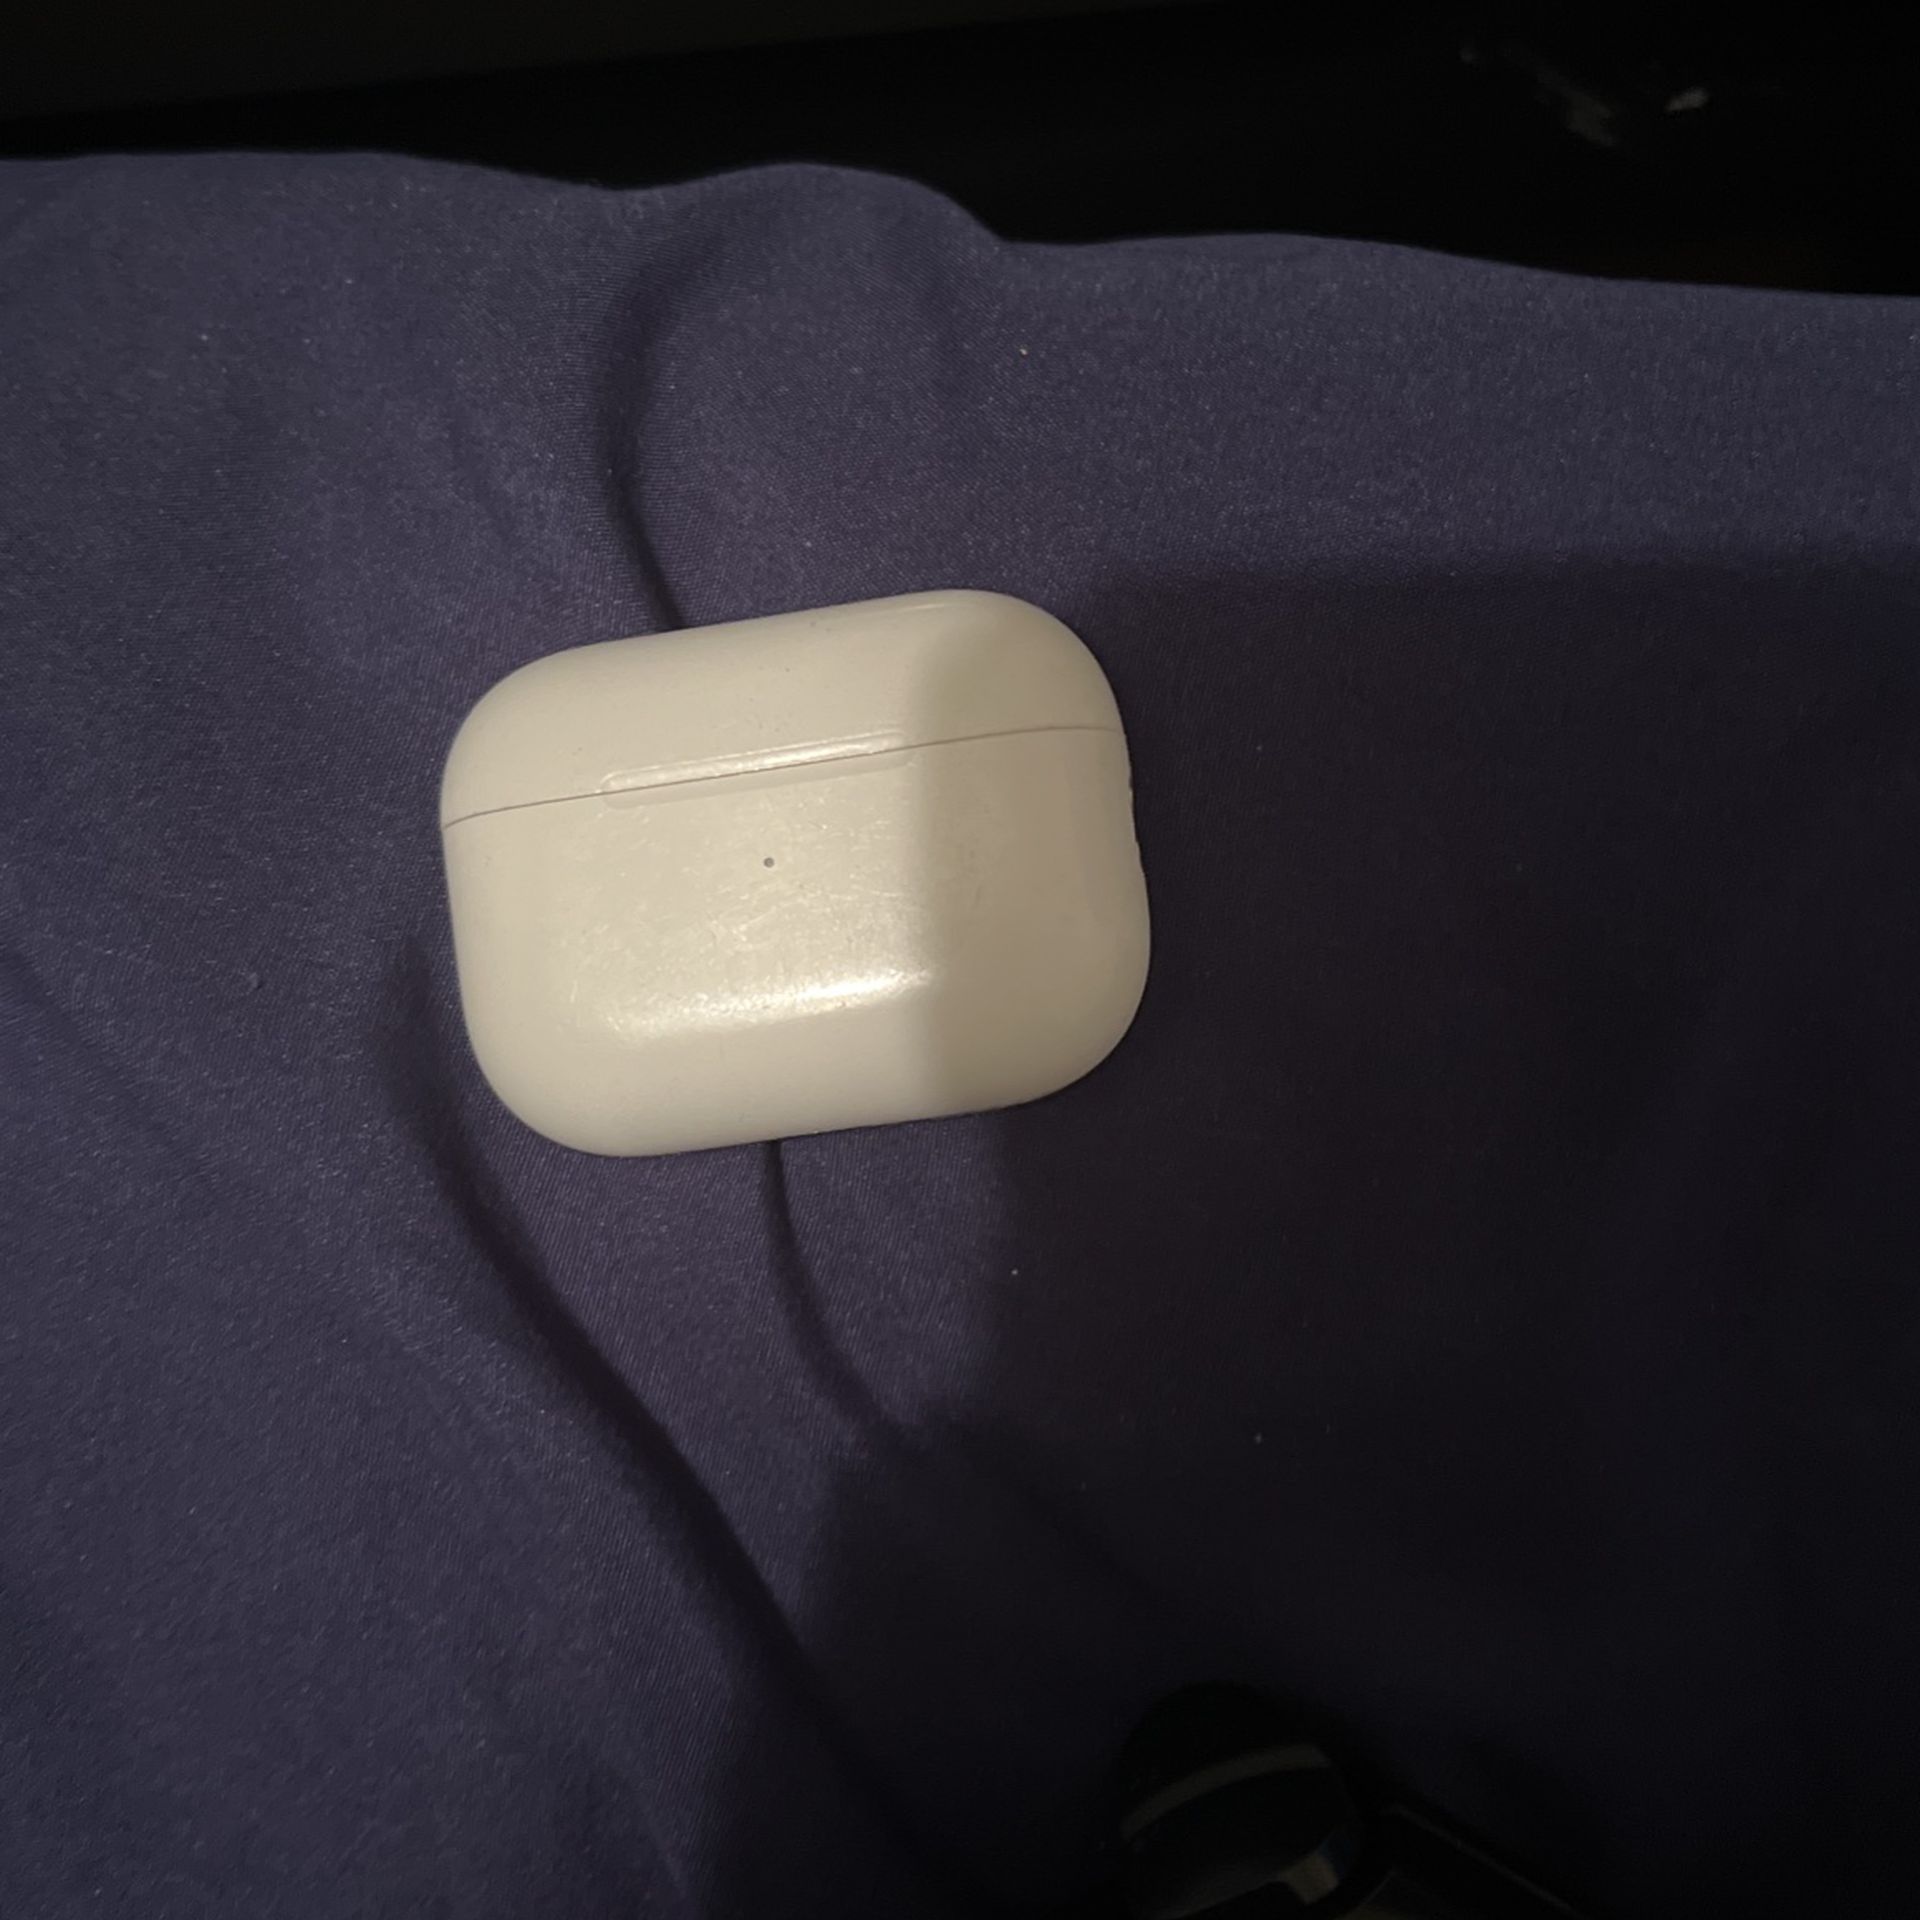 airpods pro’s 2nd generation 